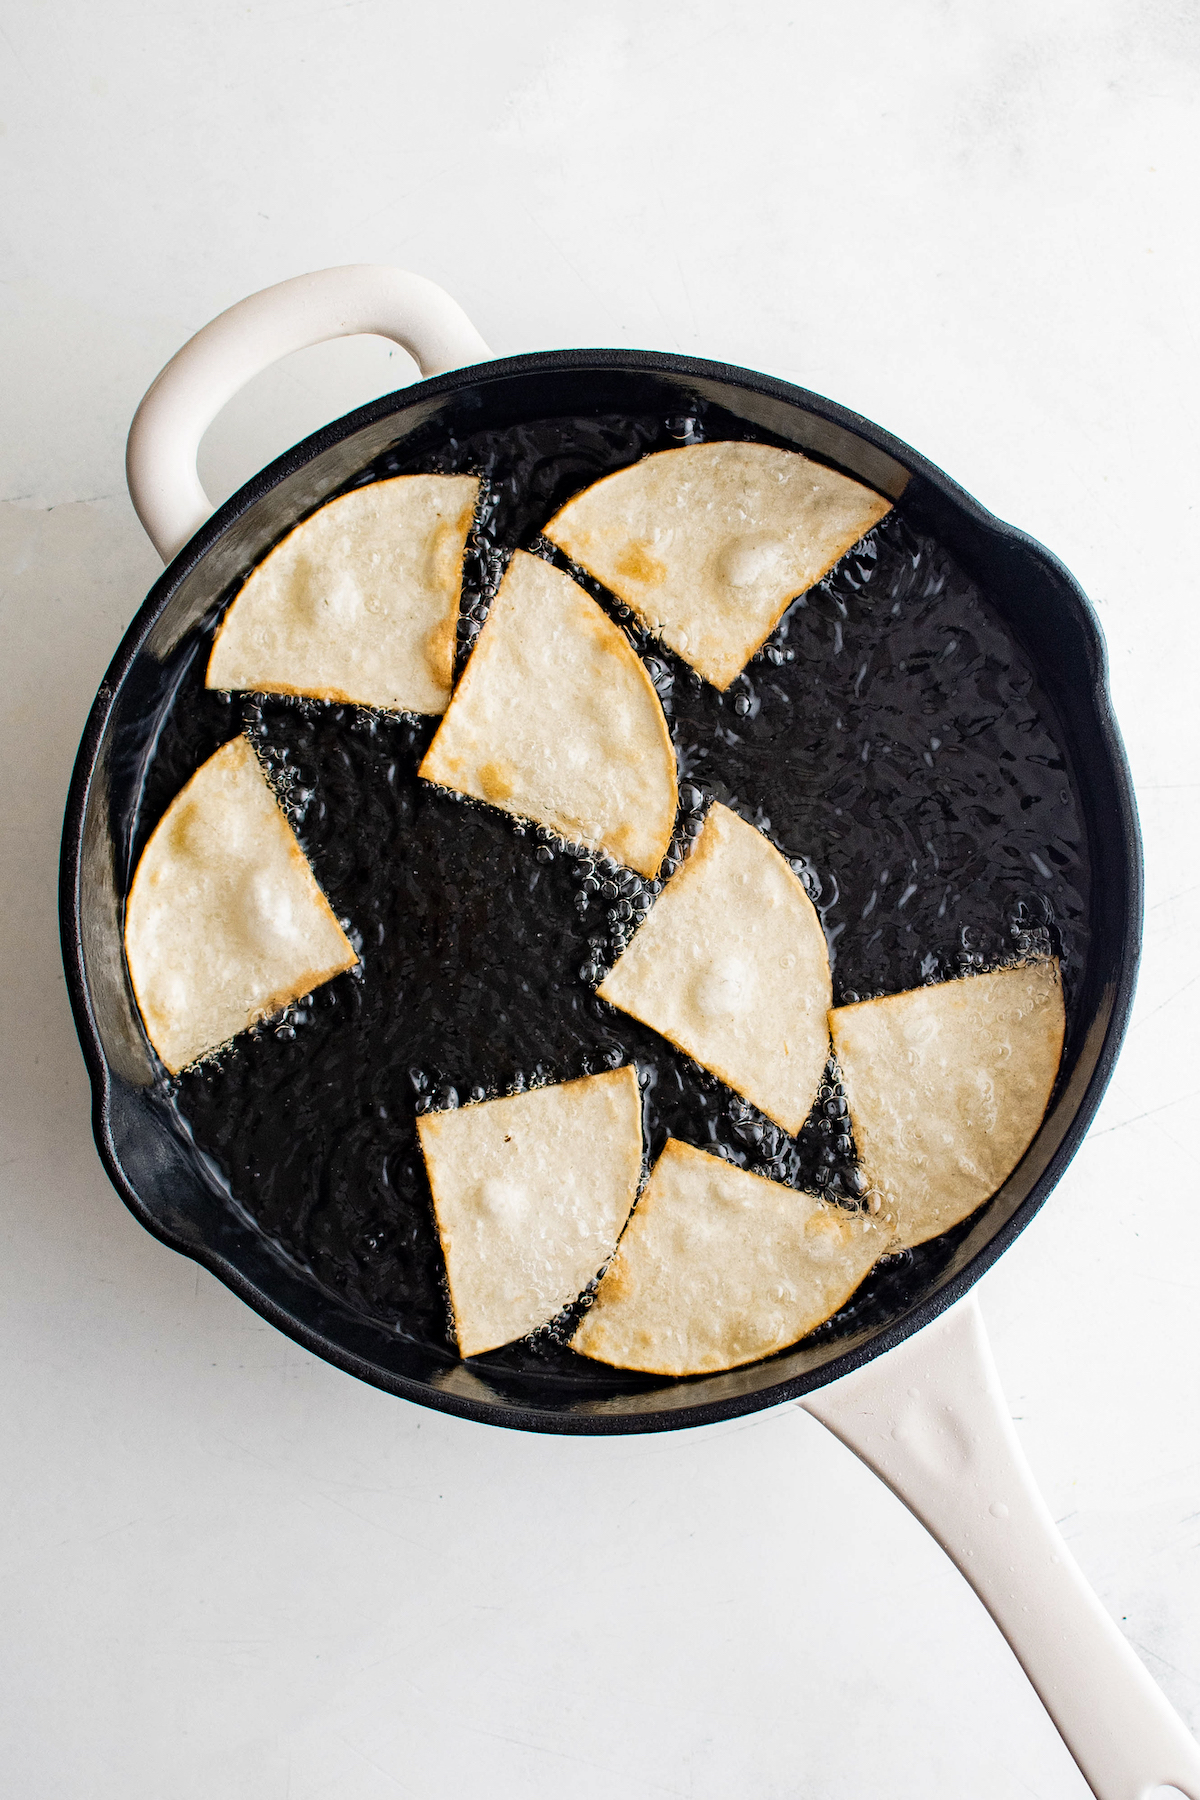 Frying the tortilla triangles.